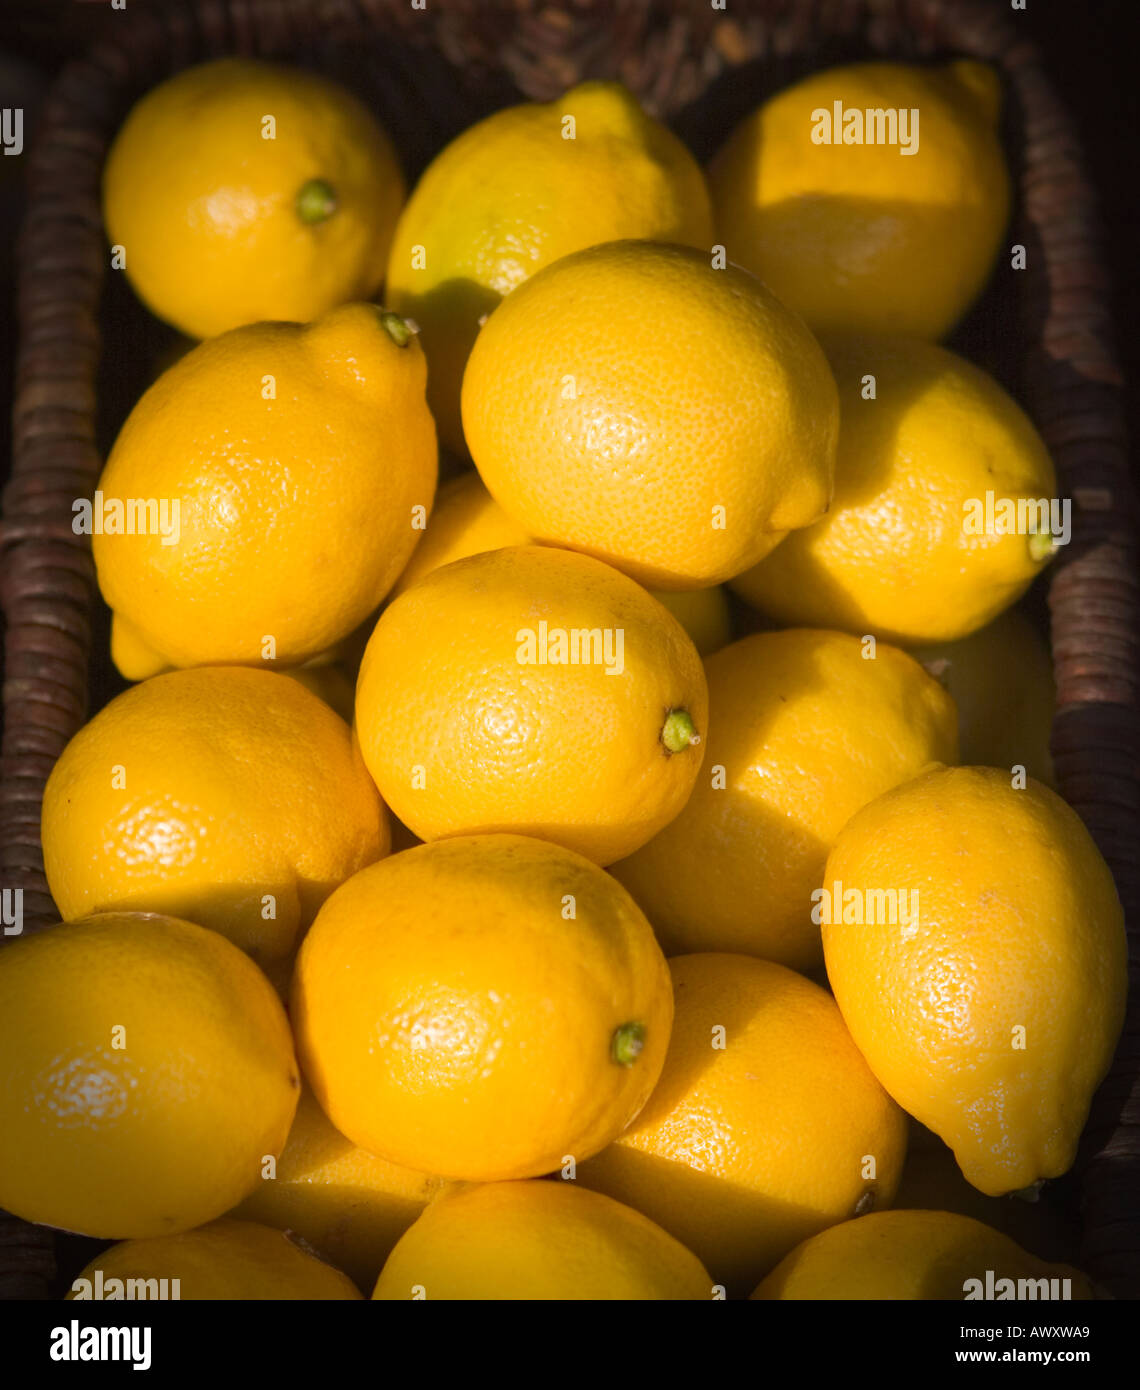 lemons in a wicker basket on display at a produce stand in an outdoor market Stock Photo